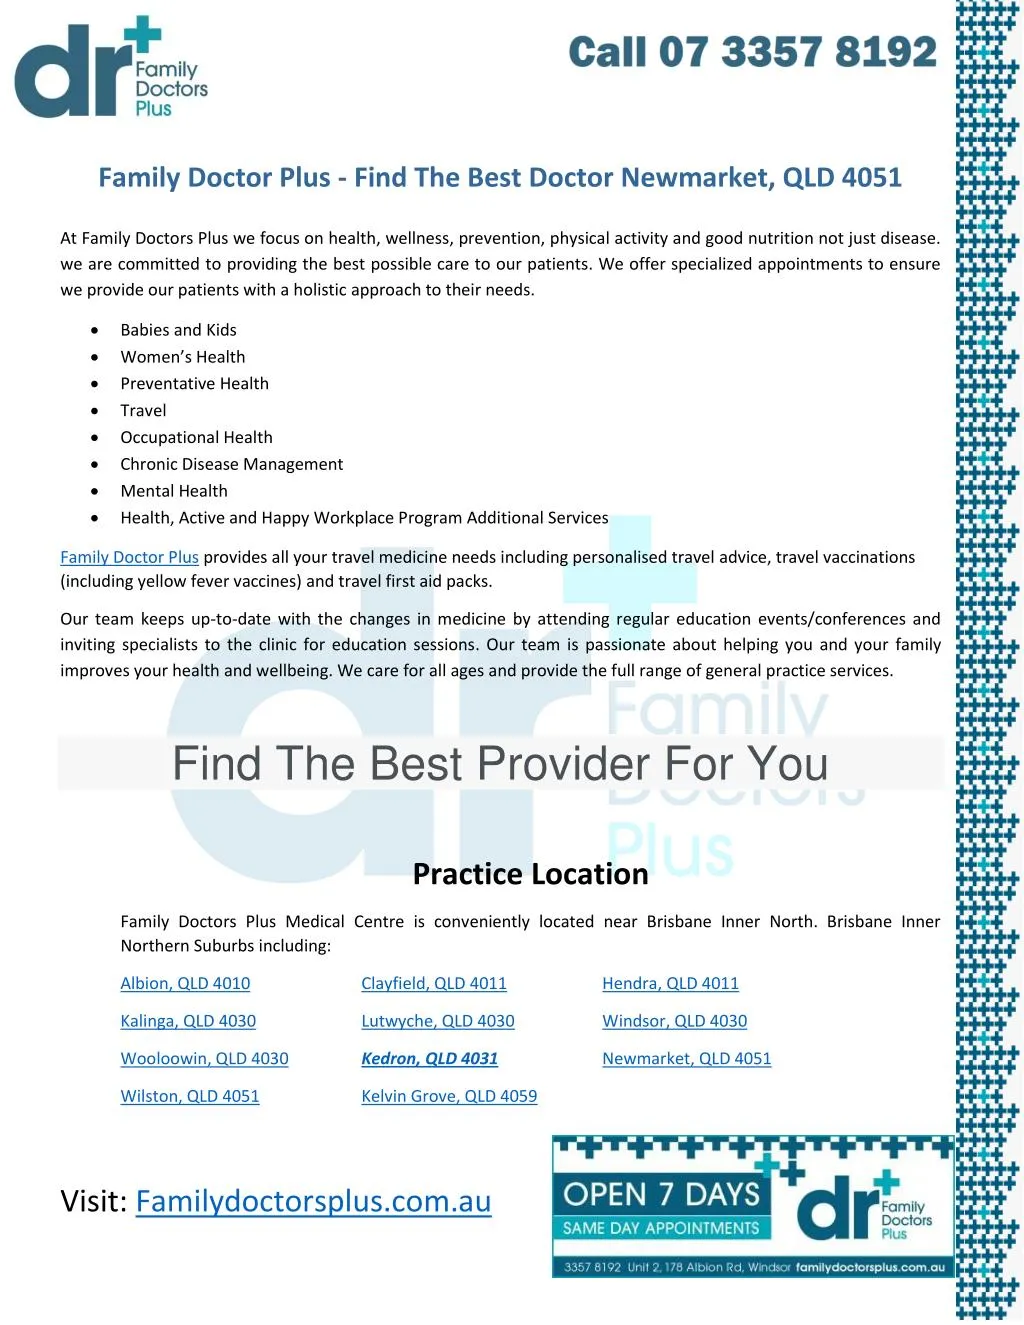 family doctor plus find the best doctor newmarket